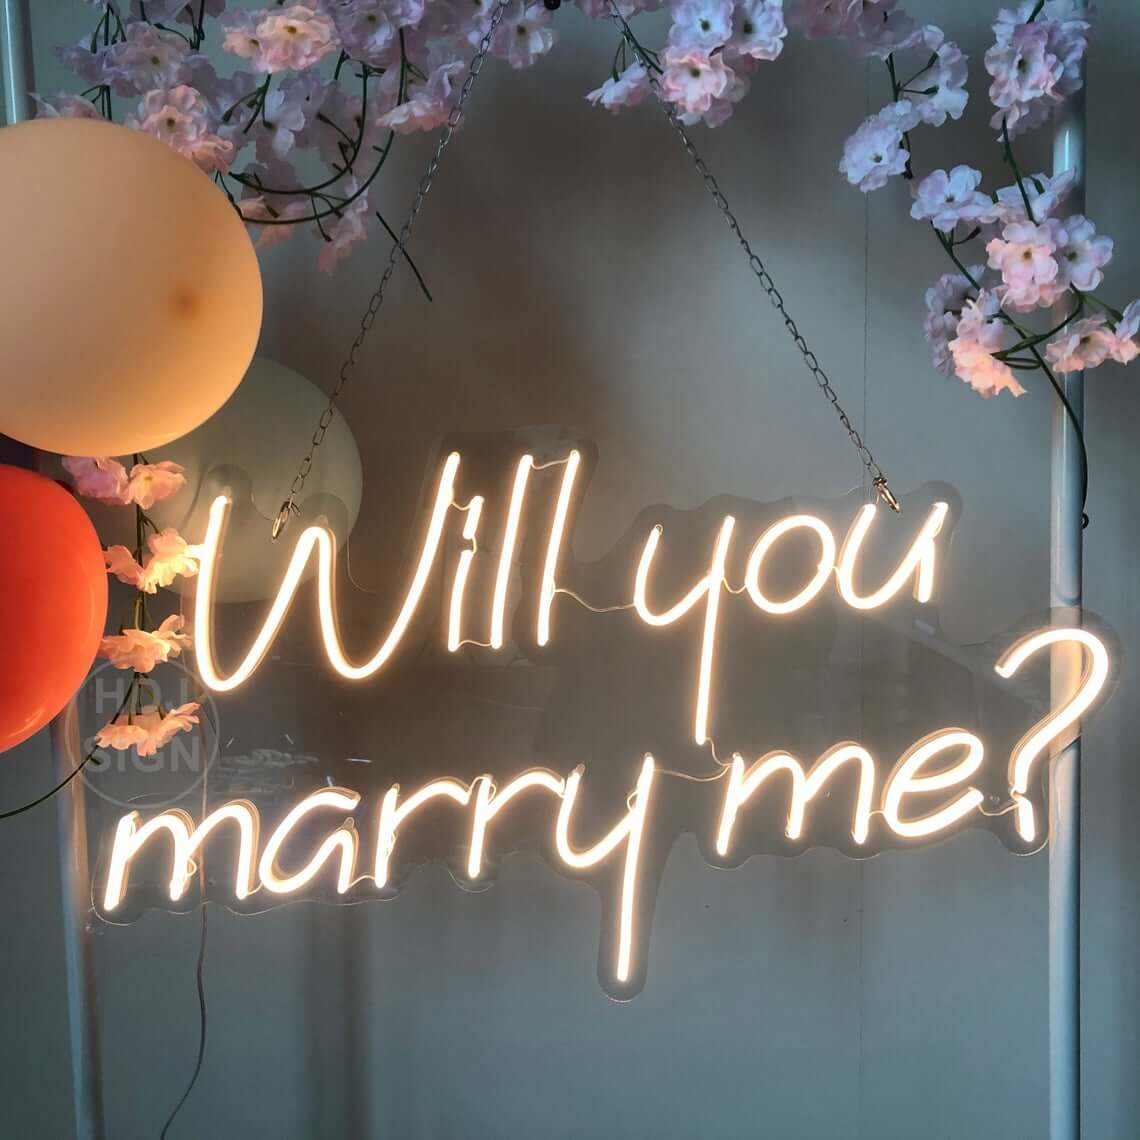 will you marry me neon sign cover